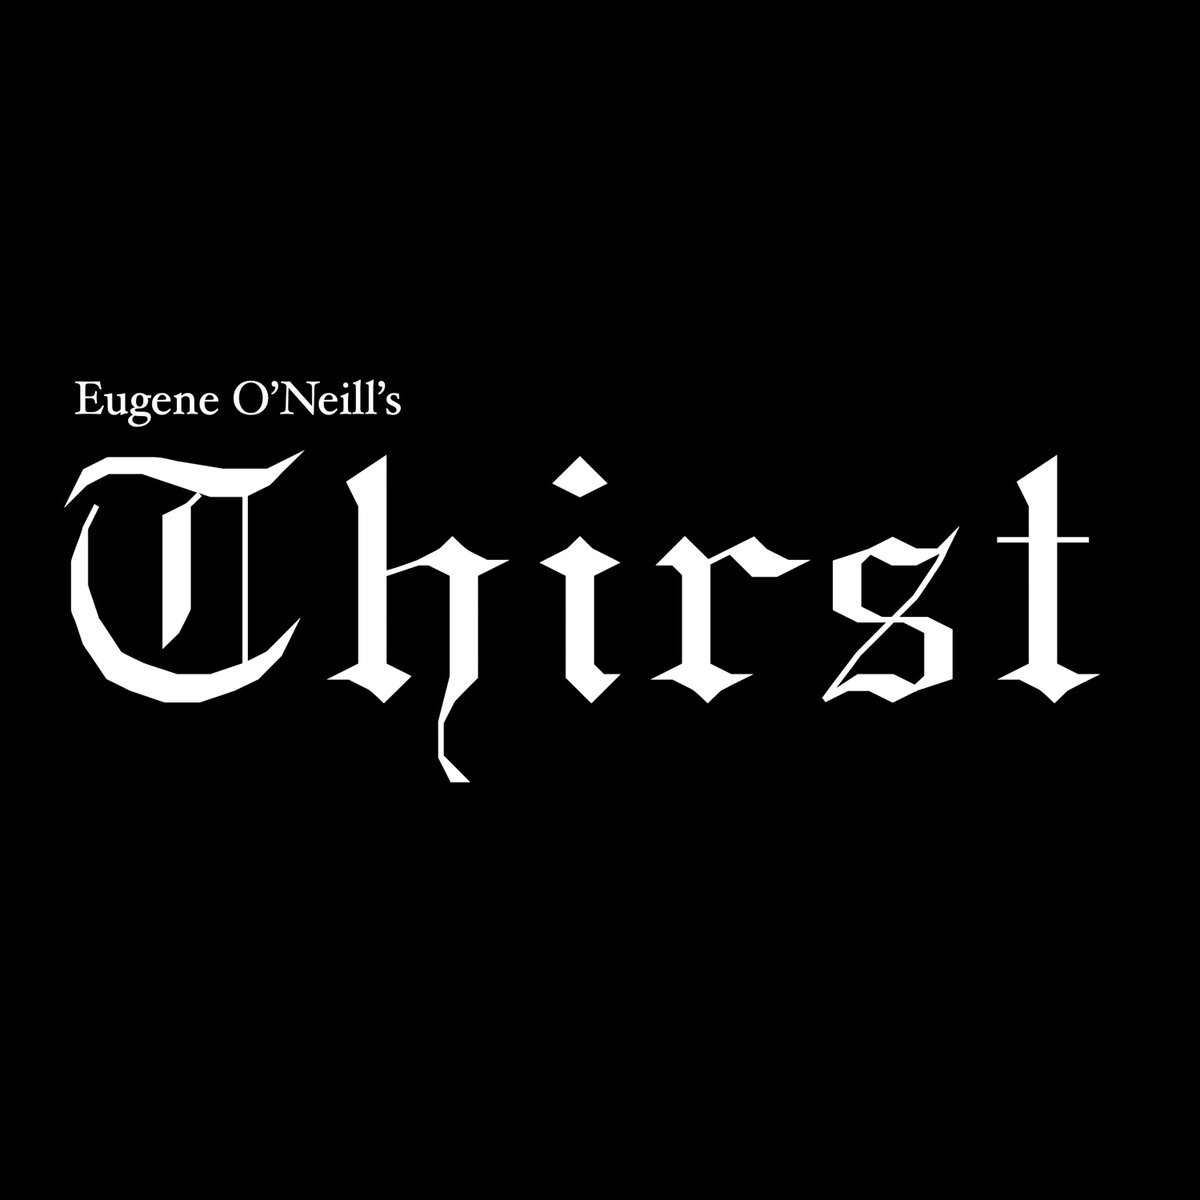 My 23rd #indie feature - my adaptation of Eugene O'Neill's 'Thirst' (which was on stage in #edfringe 2023) will be premiering in #edfringe 2024 at 11pm, Monday 19th August at theSpaceUK @ Symposium Hall!